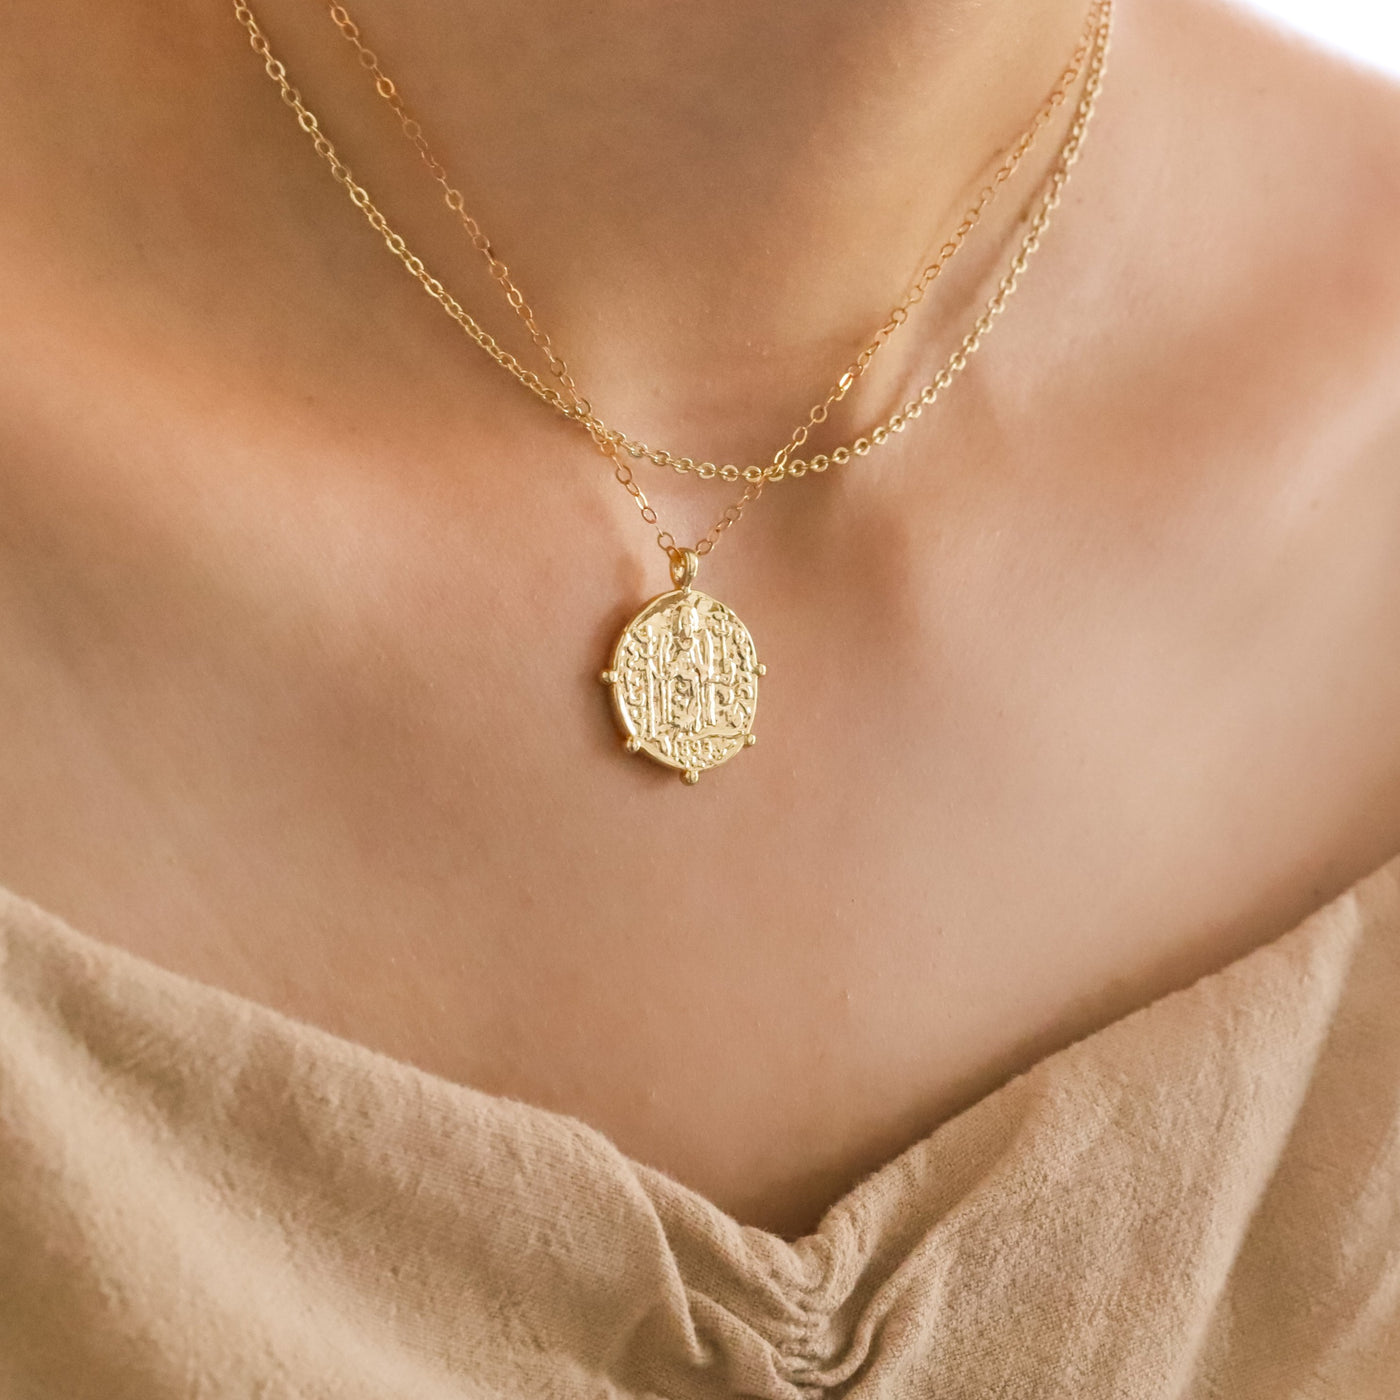 Gold filled coin pendant necklace